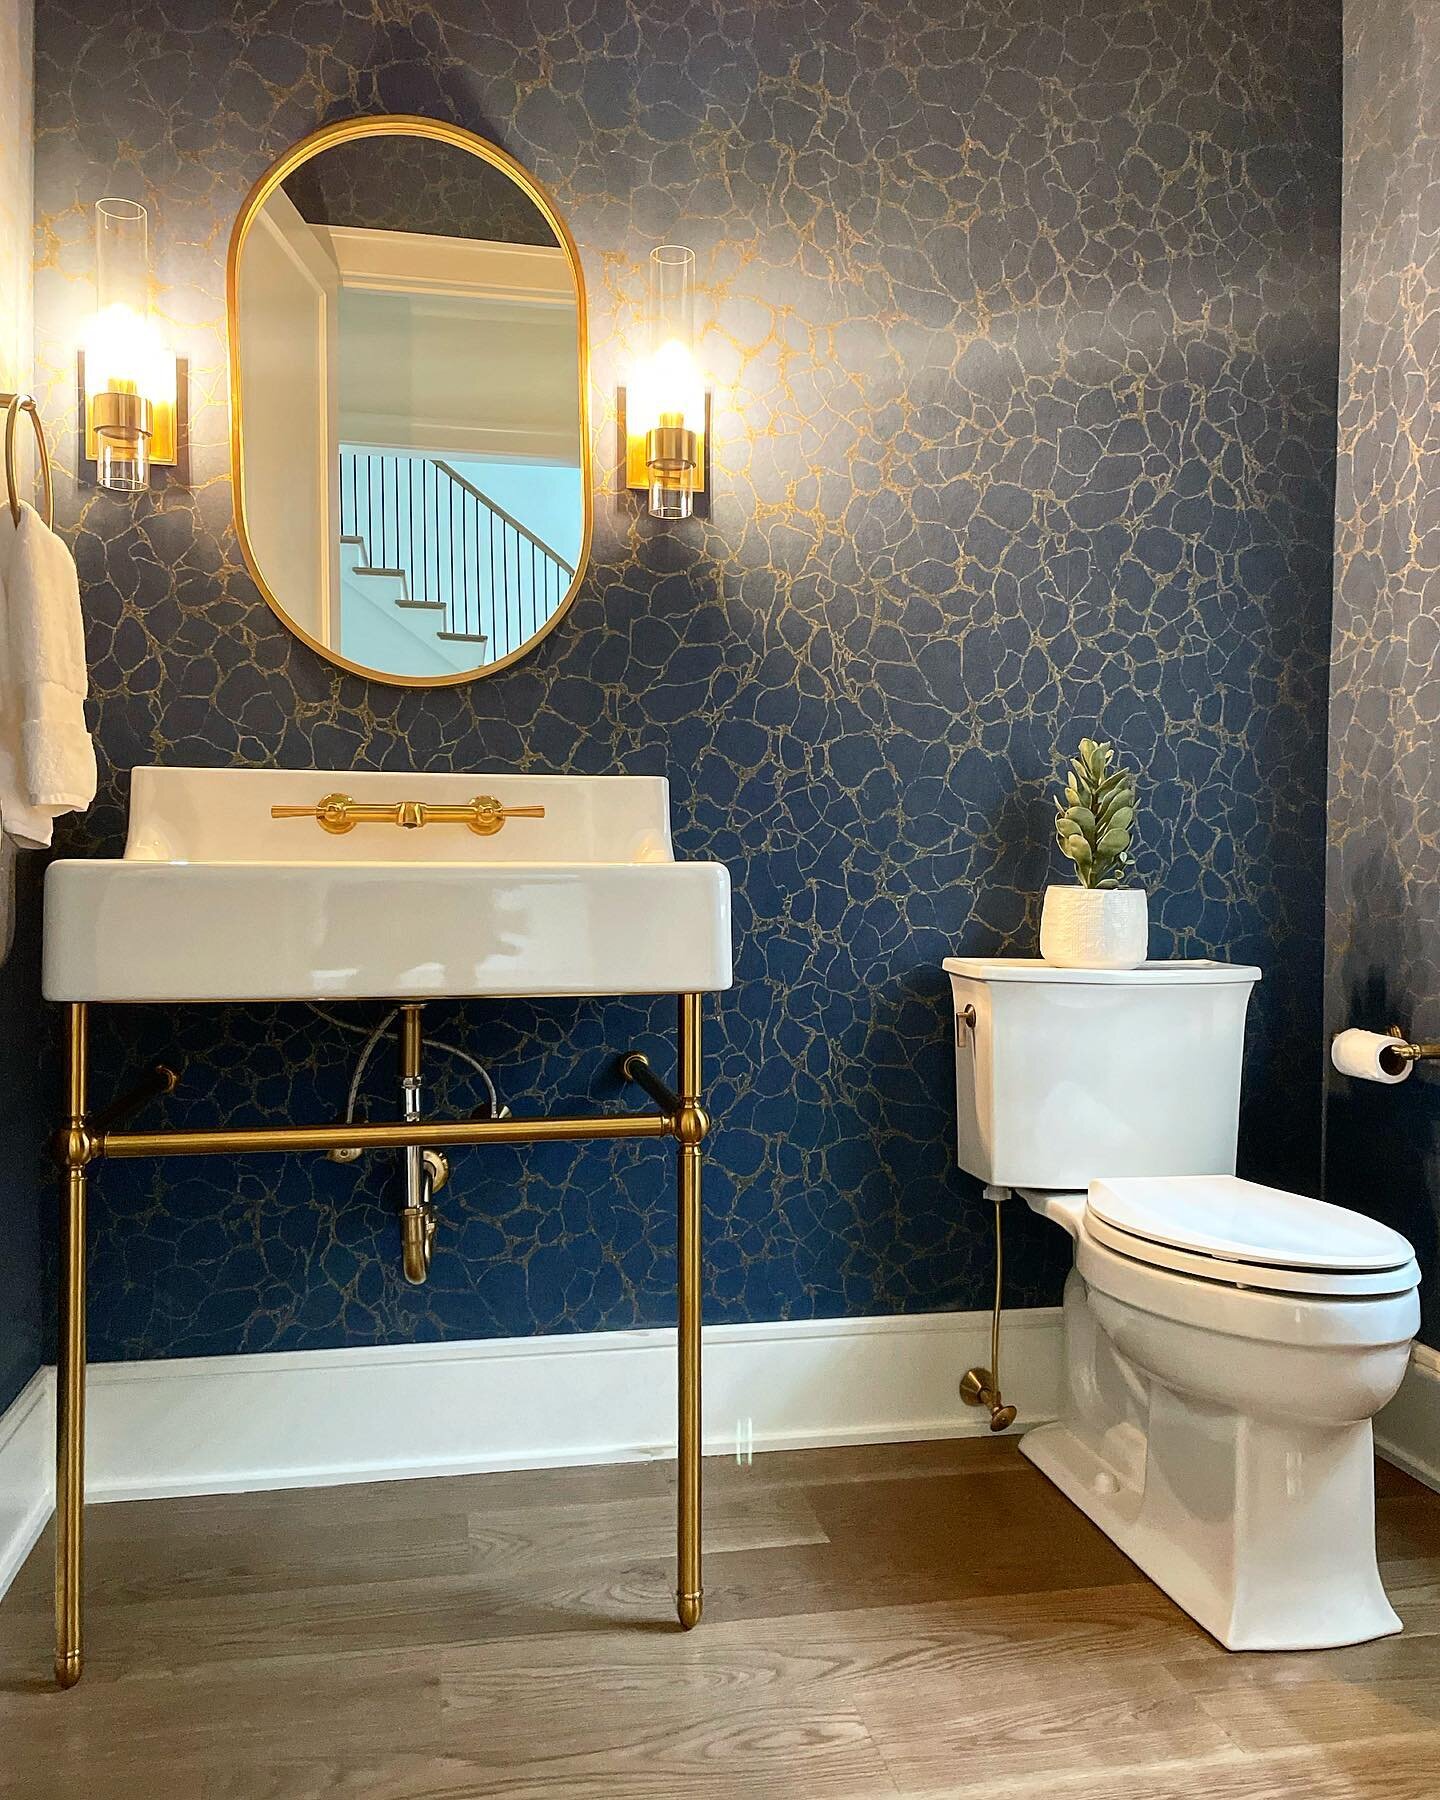 How fabulous is this powder room? 

Interior designs by @homestylesdesign 
~~~~~~~~~~~~~~~~~~~~~~~~~~~~

Homestyles Interior Design
📱704-906-7469
📧 Wendy@HomestylesInteriorDesign.com
🕸 www.HomestylesInteriorDesign.com⁣
🛋 @vanguardfurniture Author